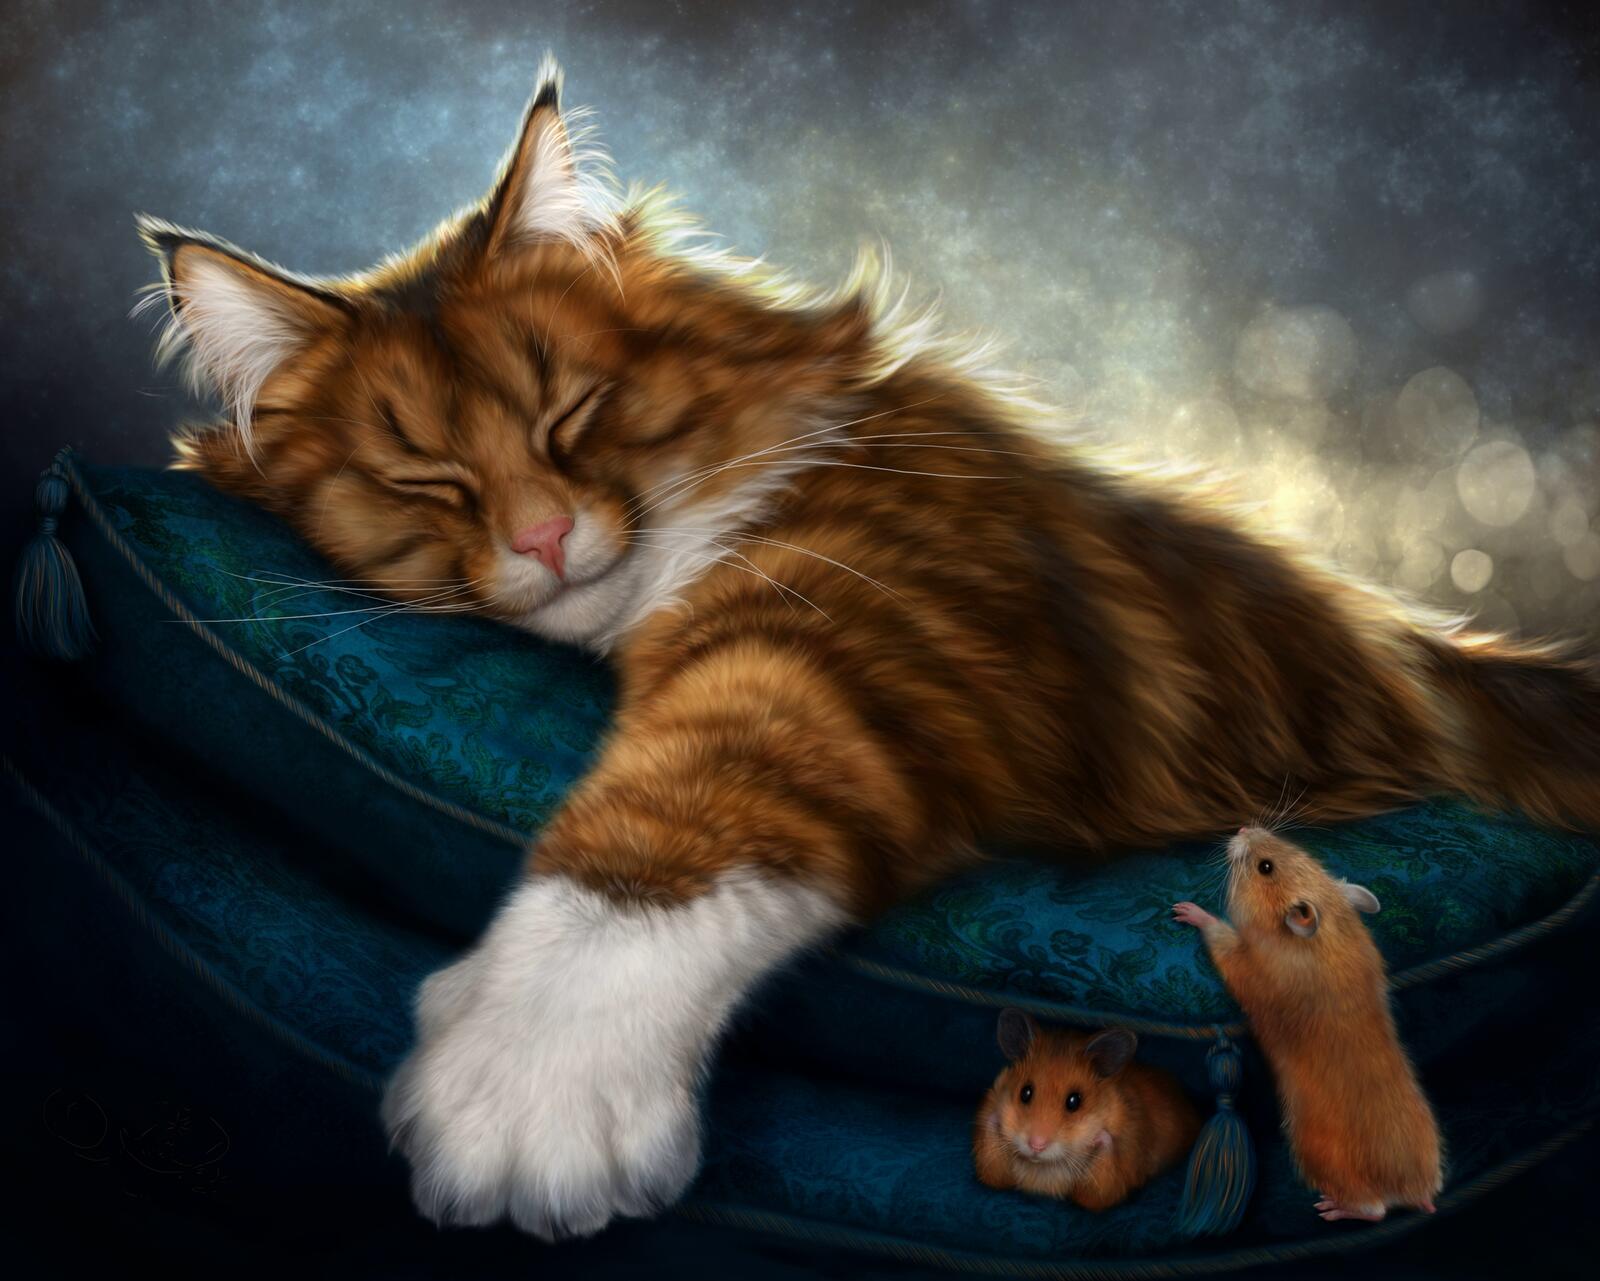 Wallpapers cat mouse dream on the desktop